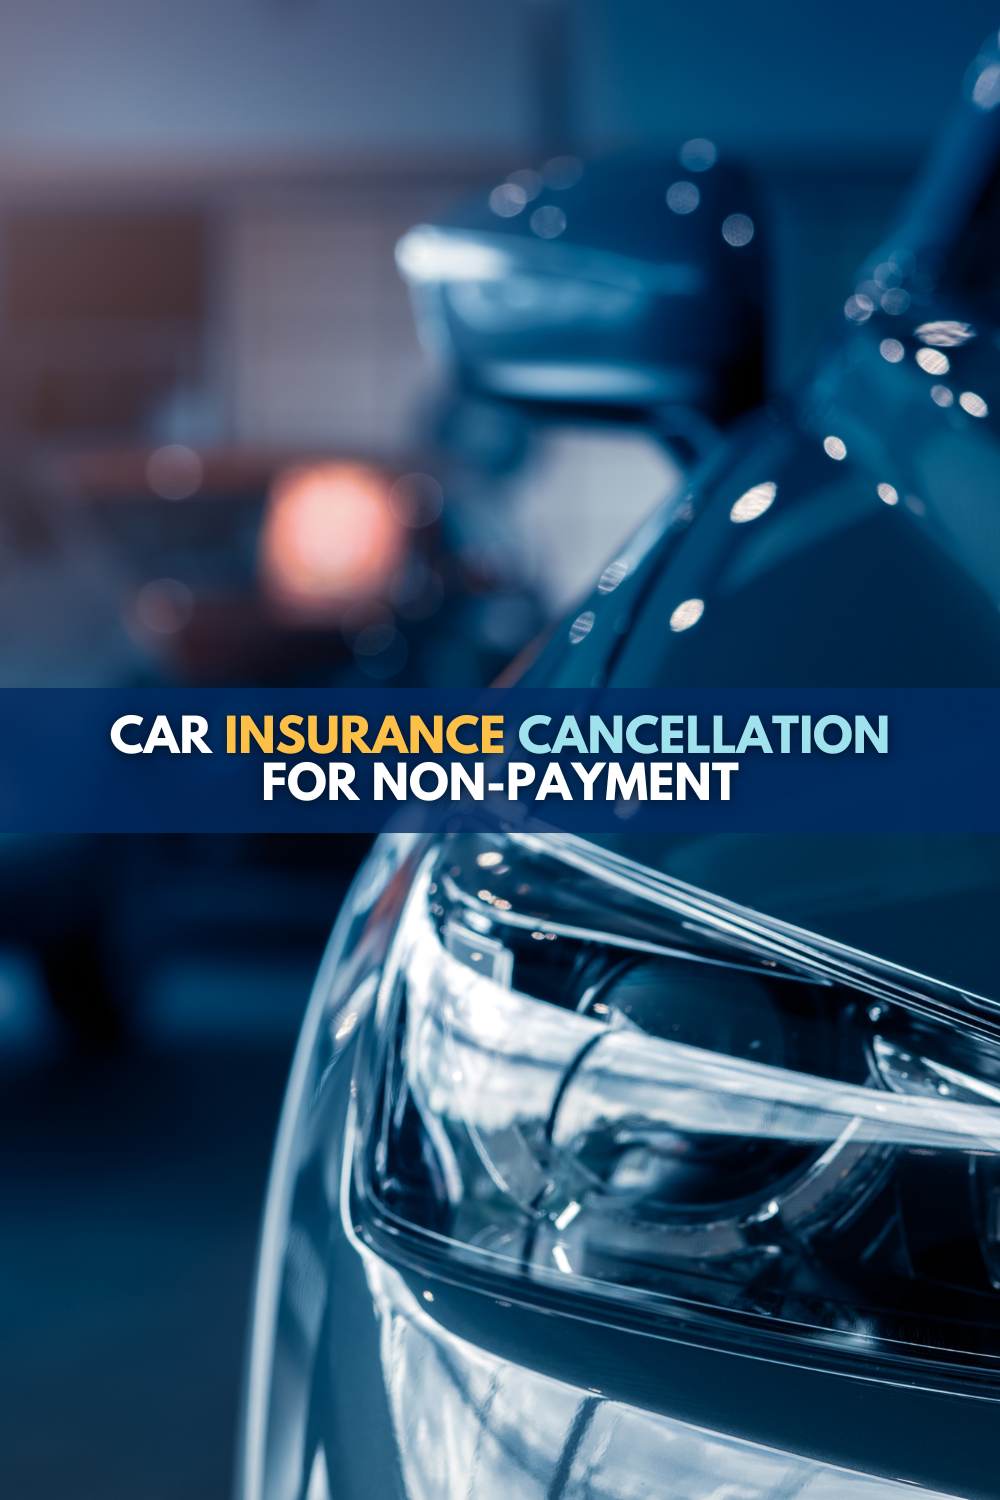 Michigan Car Insurance Cancellation For Non-Payment Explained